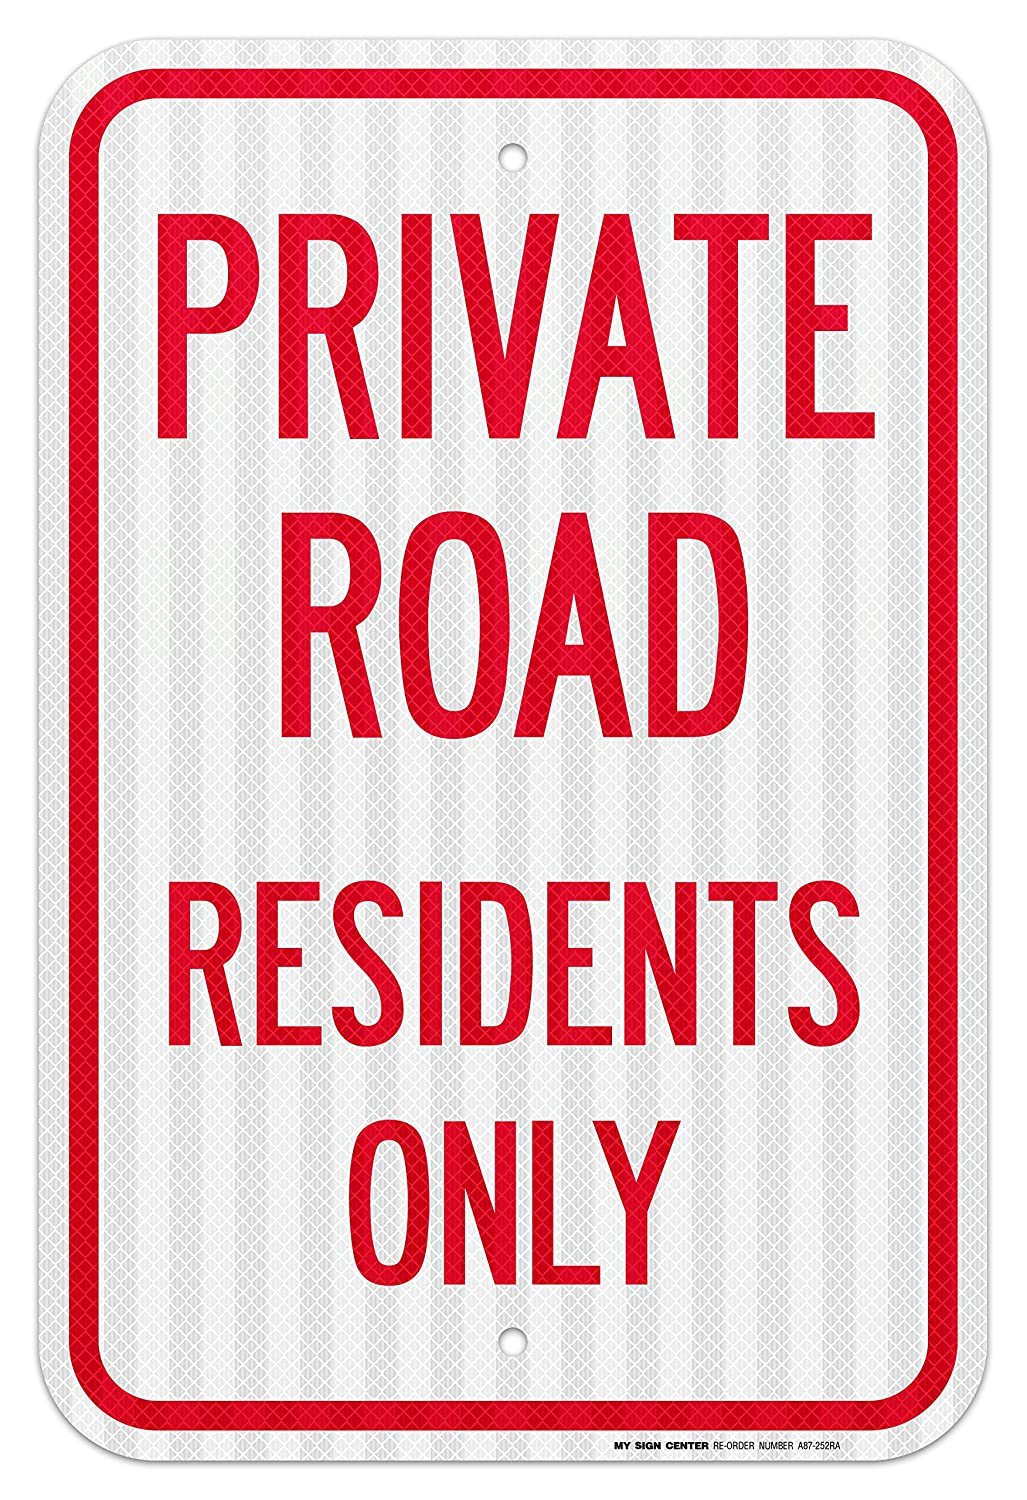 Private Road Residents Only Laminated Sign